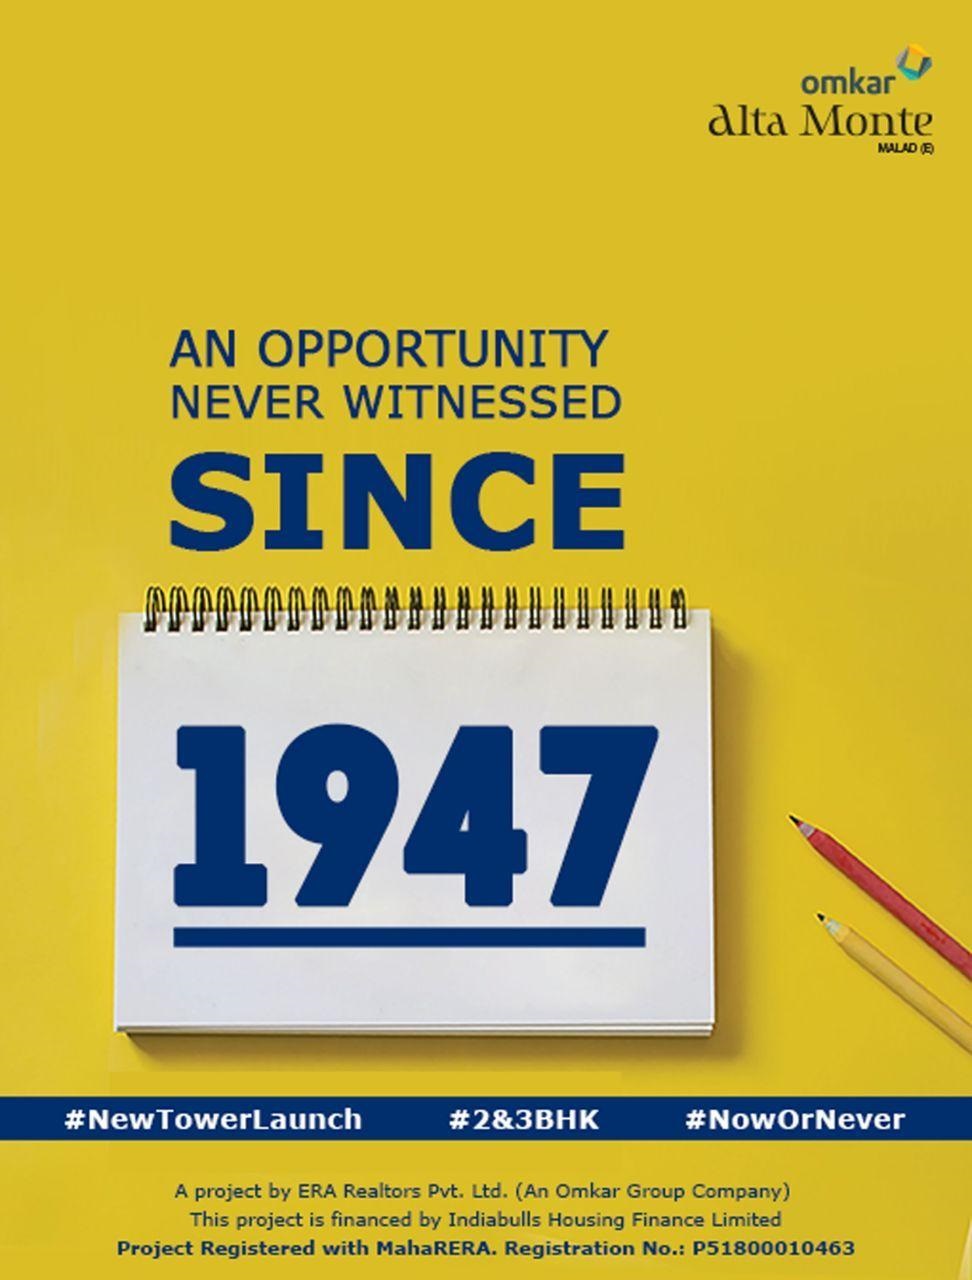 An opportunity never witnessed since 1947 at Omkar Alta Monte in Mumbai Update